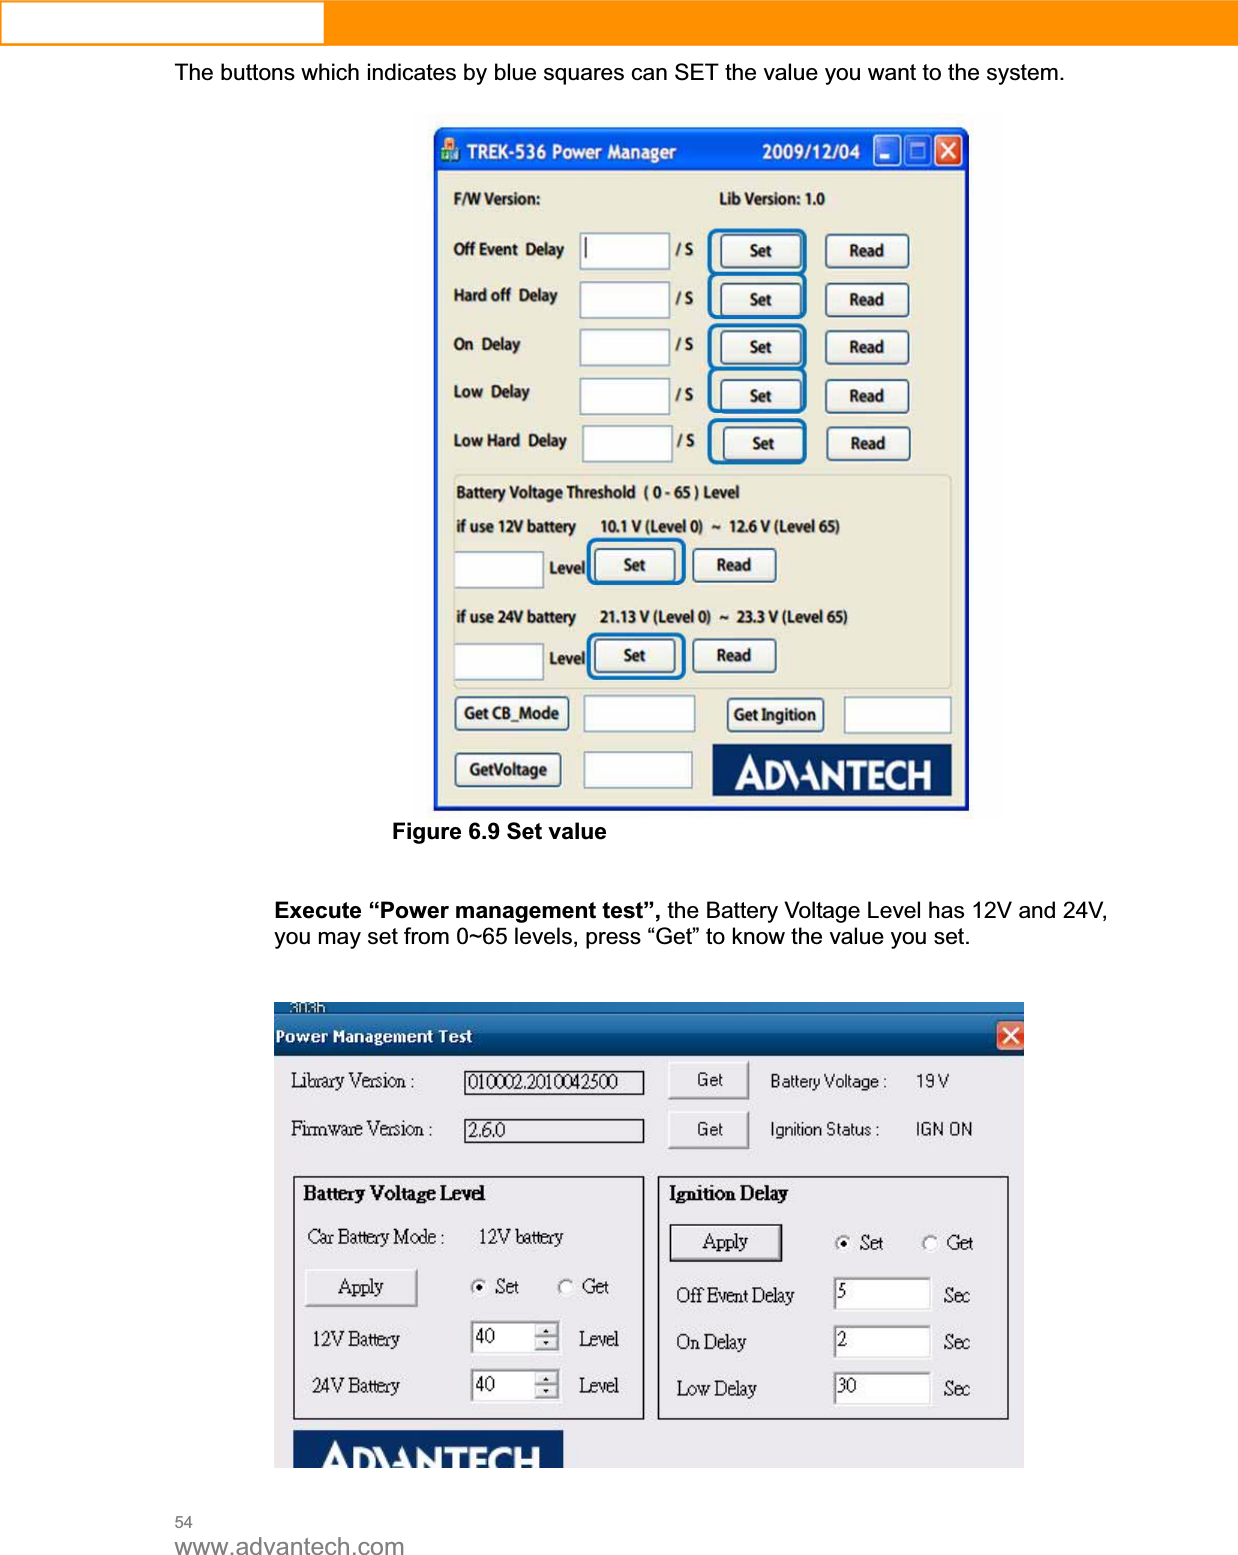 54www.advantech.comThe buttons which indicates by blue squares can SET the value you want to the system. Figure 6.9 Set valueExecute “Power management test”, the Battery Voltage Level has 12V and 24V, you may set from 0~65 levels, press “Get” to know the value you set.   